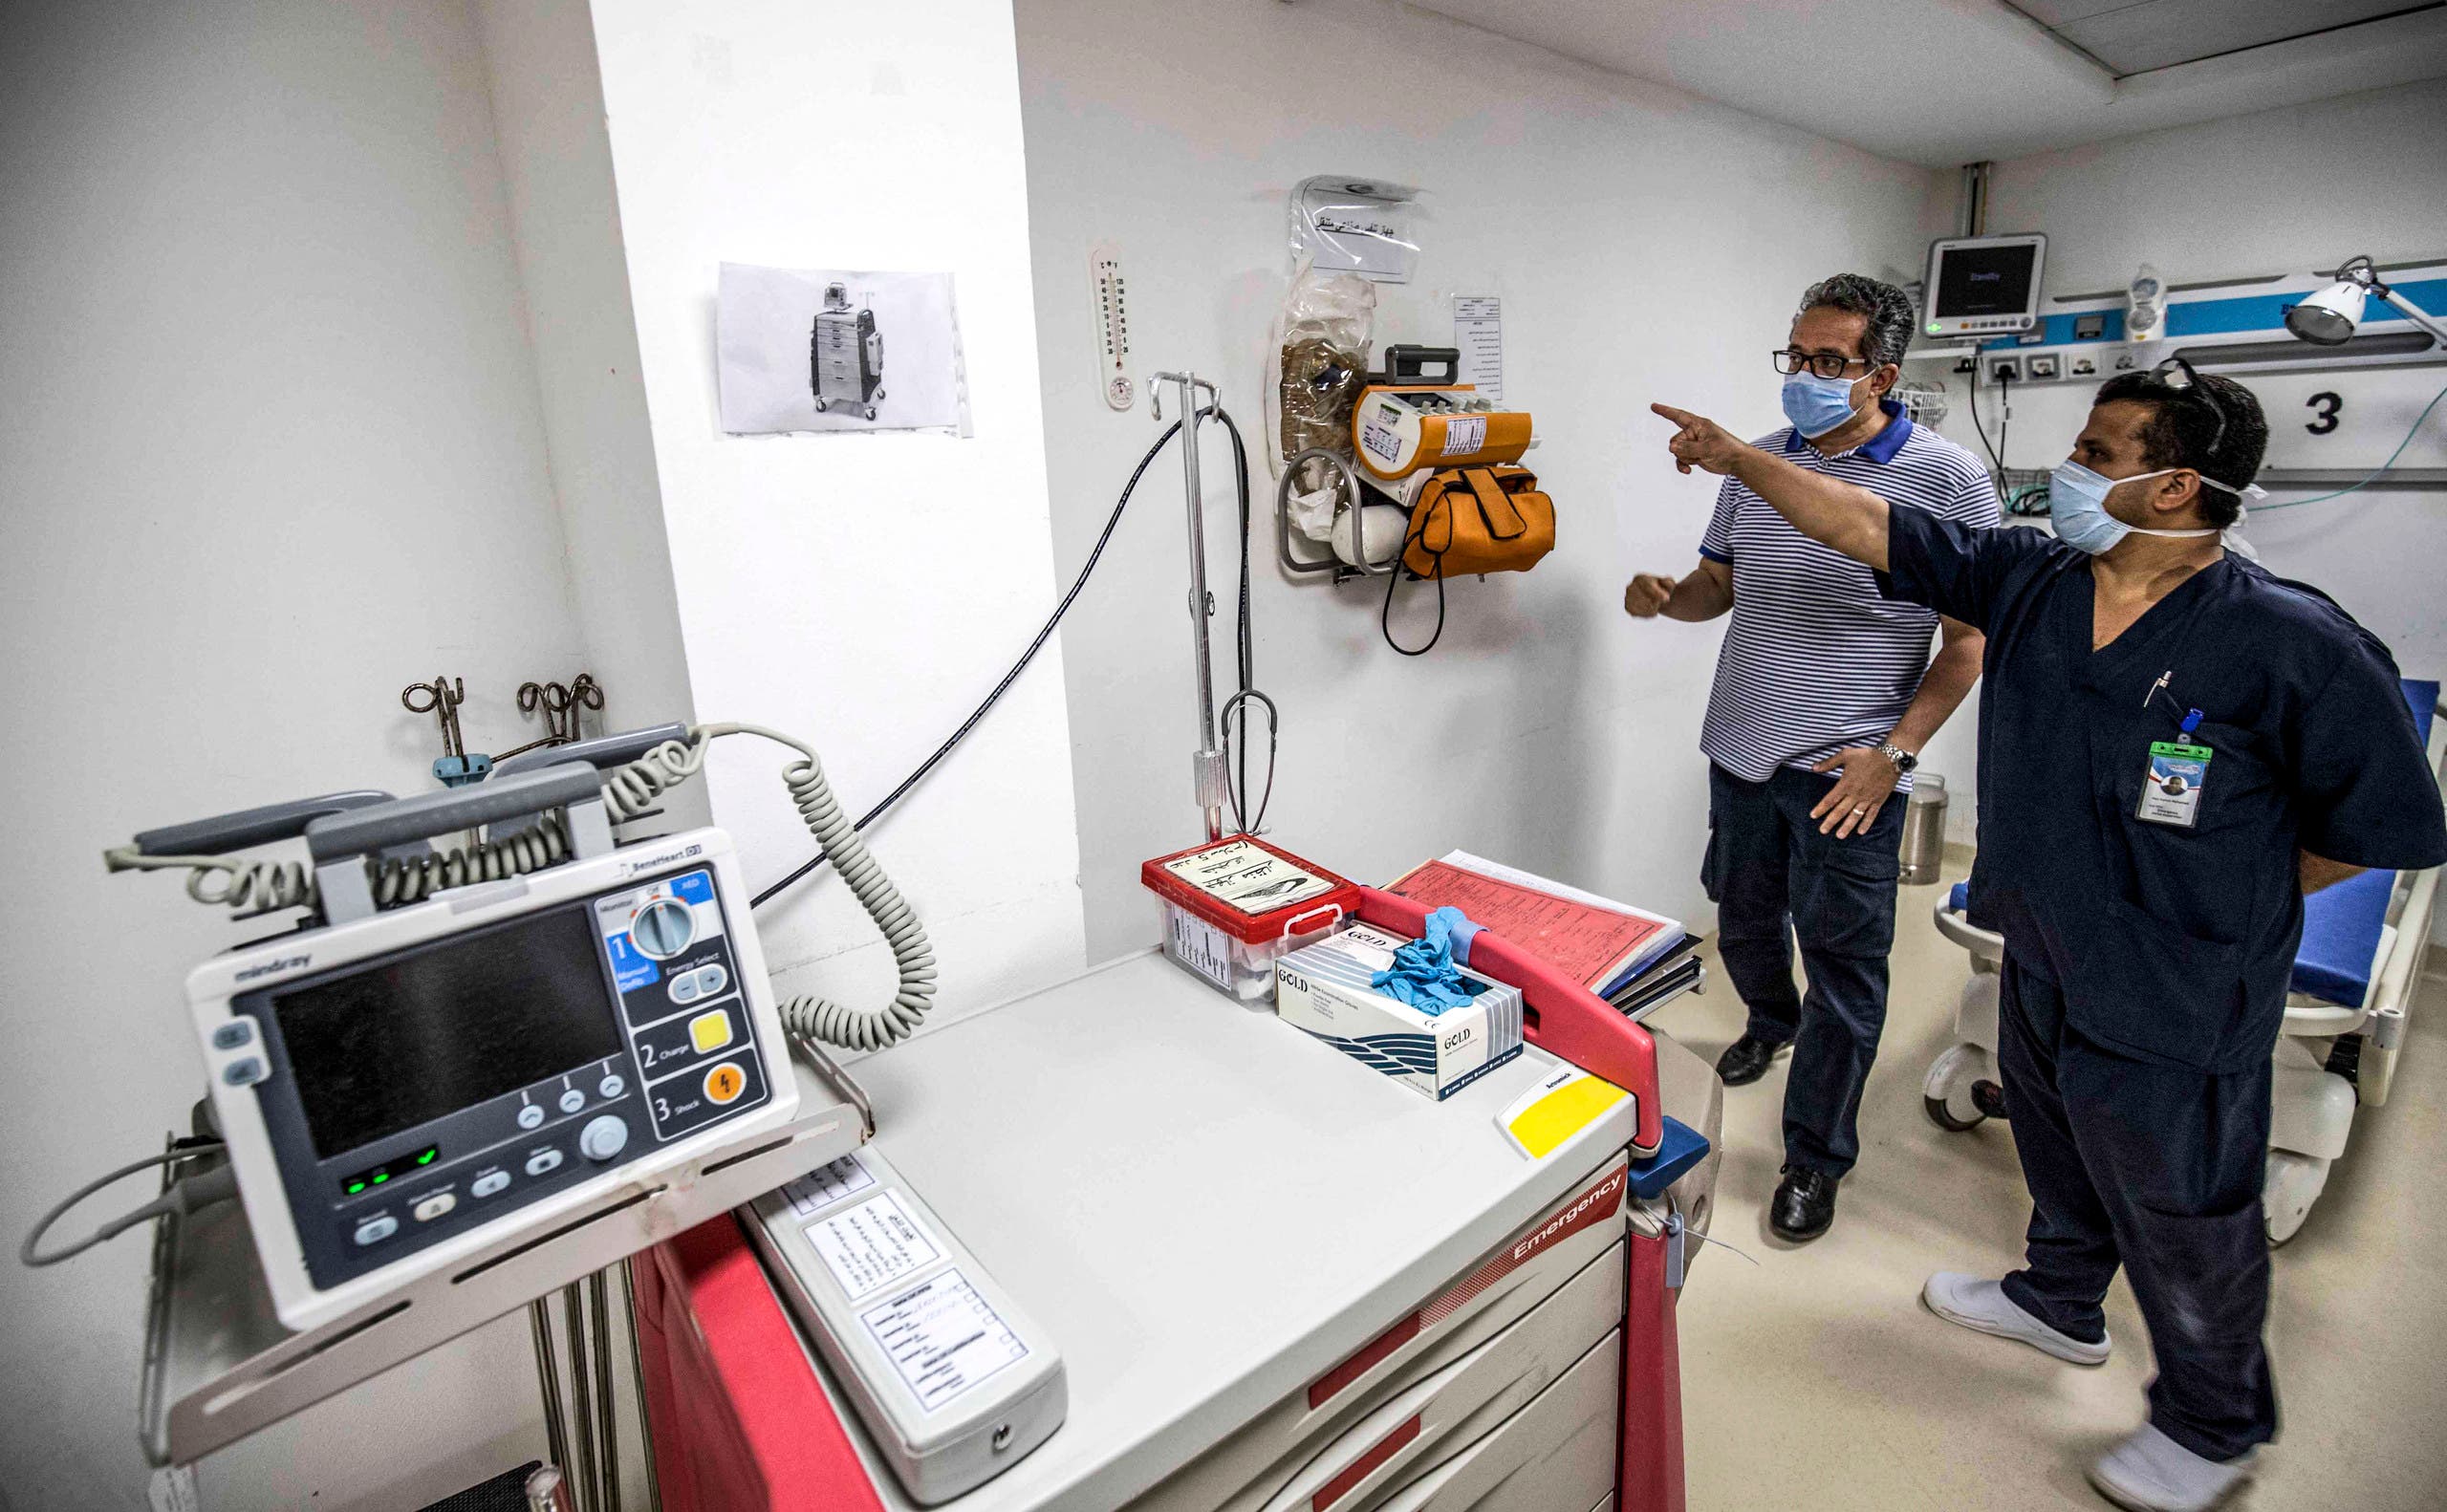 Egypt's Tourism and Antiquities Minister Khaled al-Anani is shown a portable medical ventilator device while being toured by a medical worker at Sharm International Hospital in Egypt's Sinai resort city of Sharm el-Sheikh on June 19, 2020. (File photo: AFP)